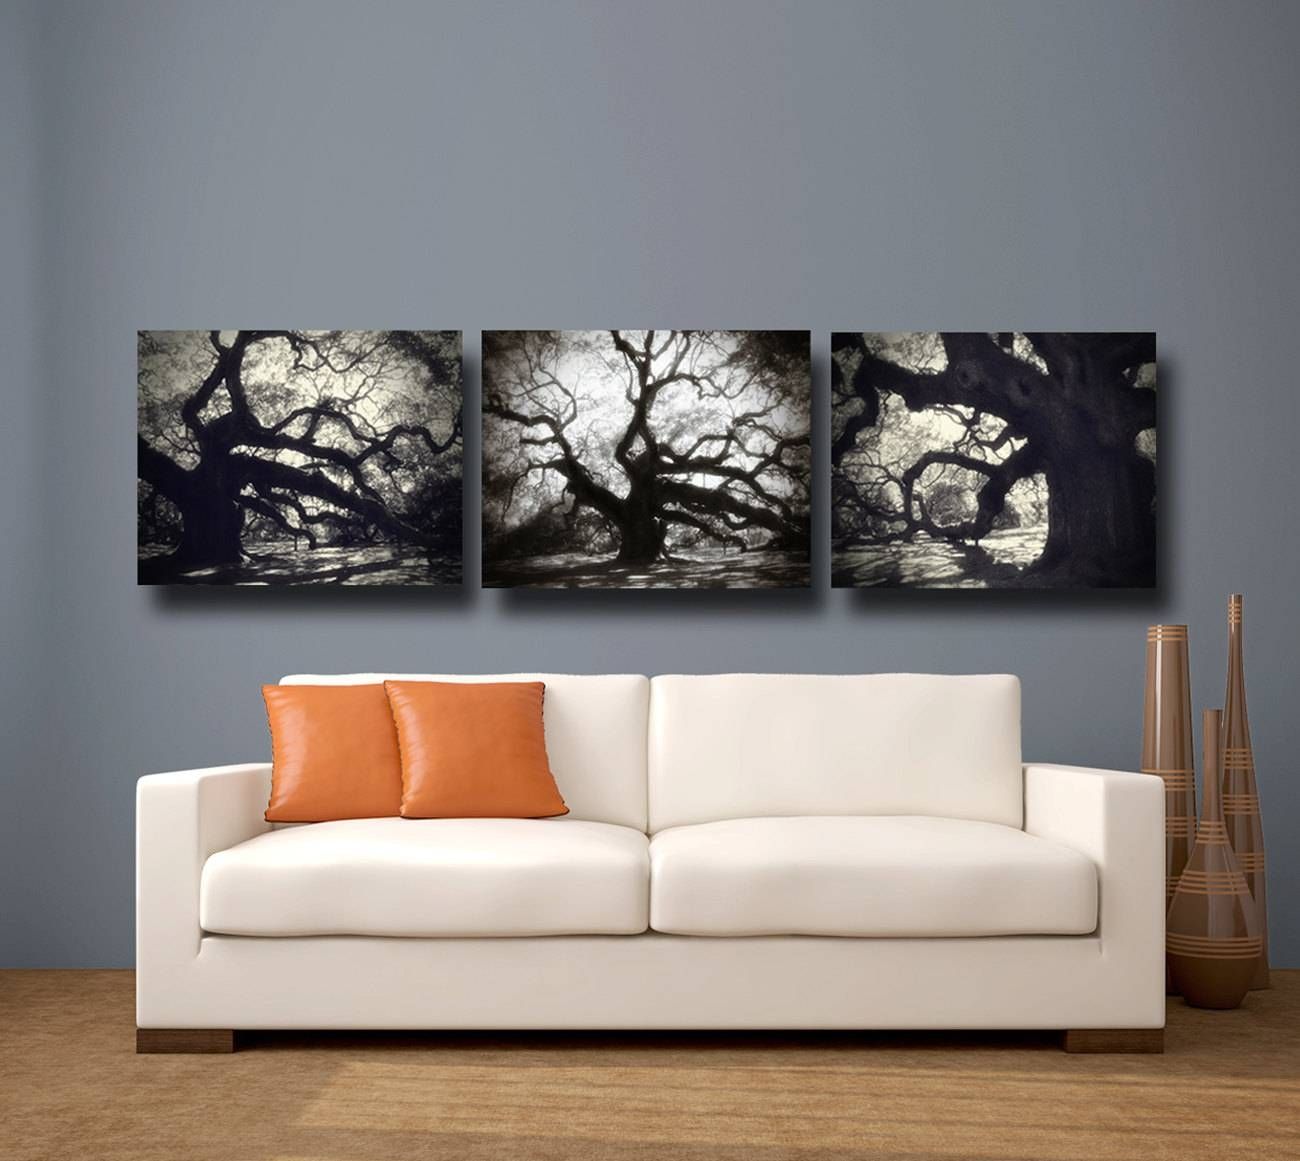 Wall Art Designs: Wall Canvas Art On Demand Free Printable Cheap Pertaining To Most Popular Canvas Wall Art 3 Piece Sets (View 20 of 20)